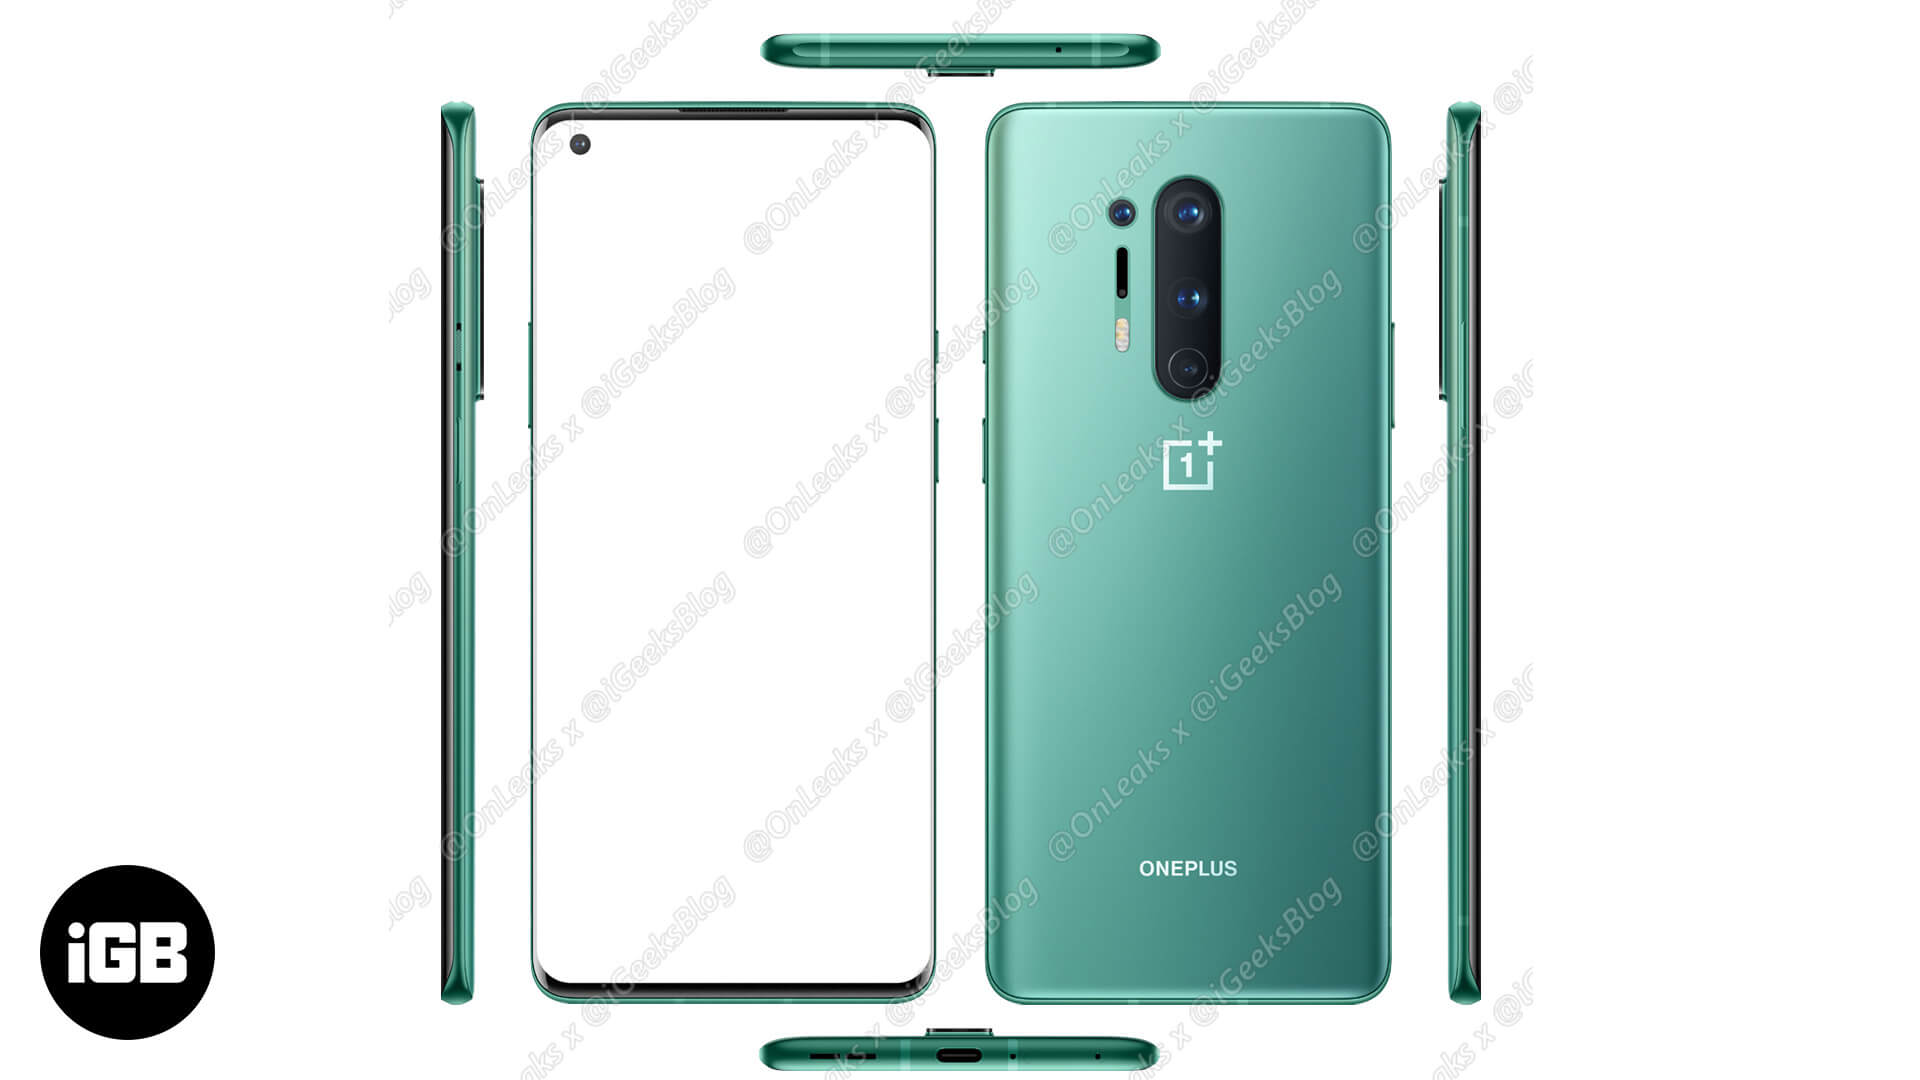 Oneplus 8 pro official image